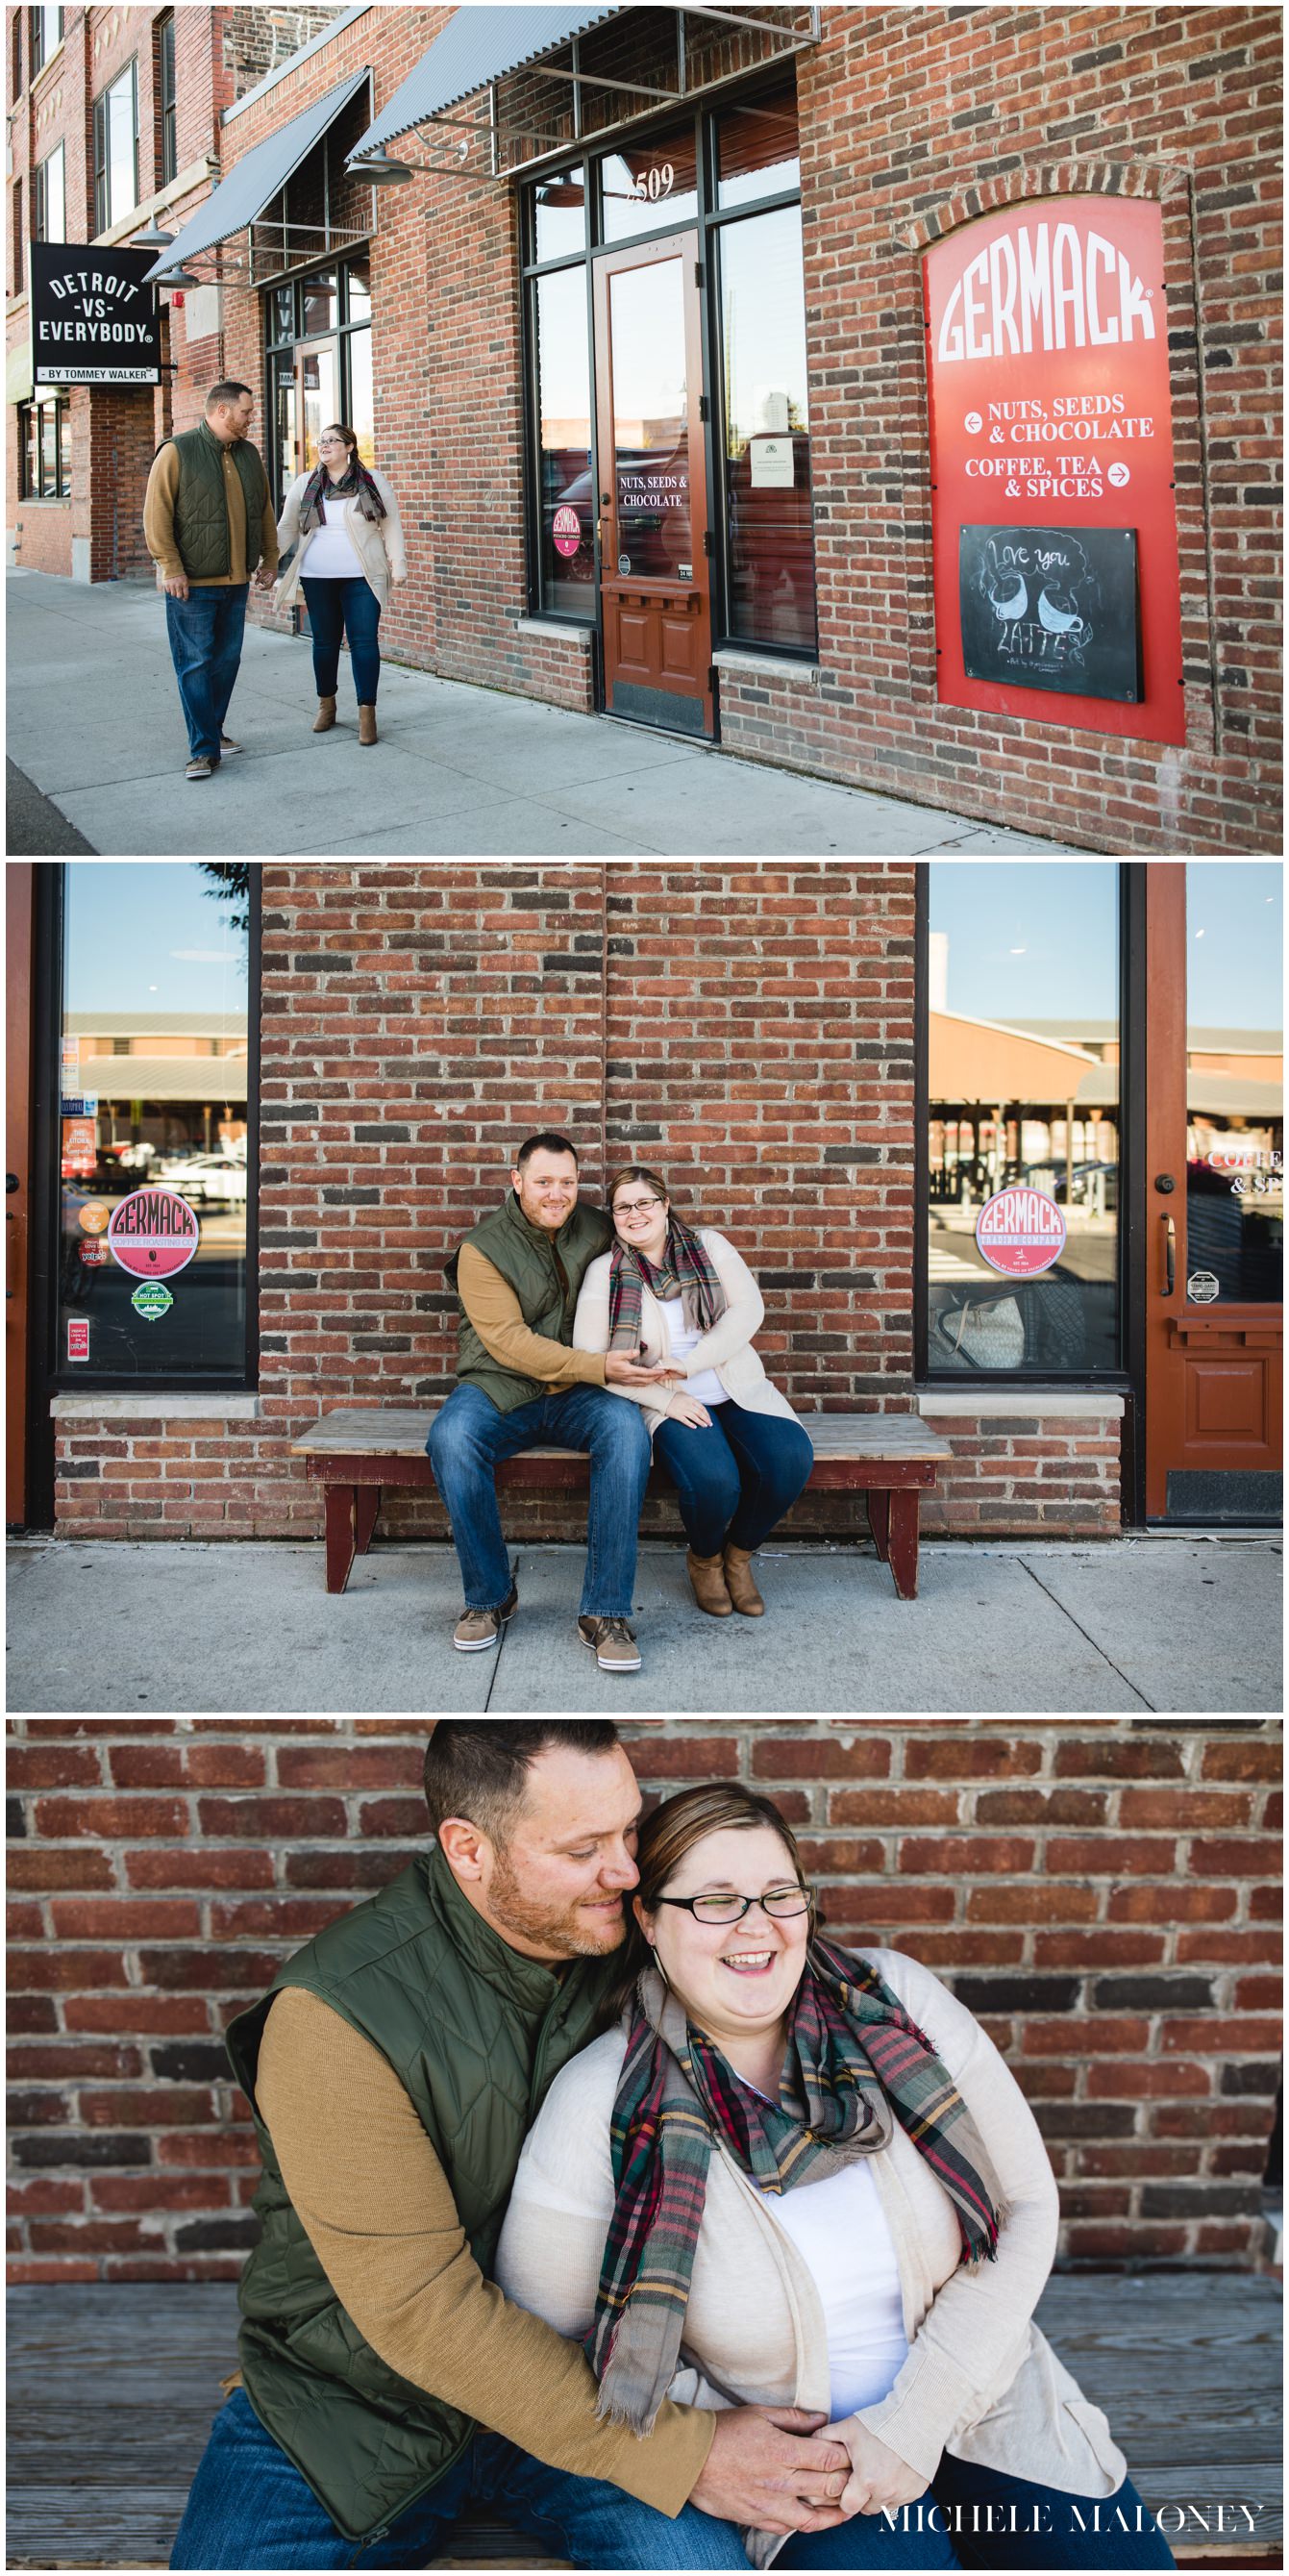 This couple is on taking photos to celebrate their engagement at the Eastern Market in Detroit Michigan